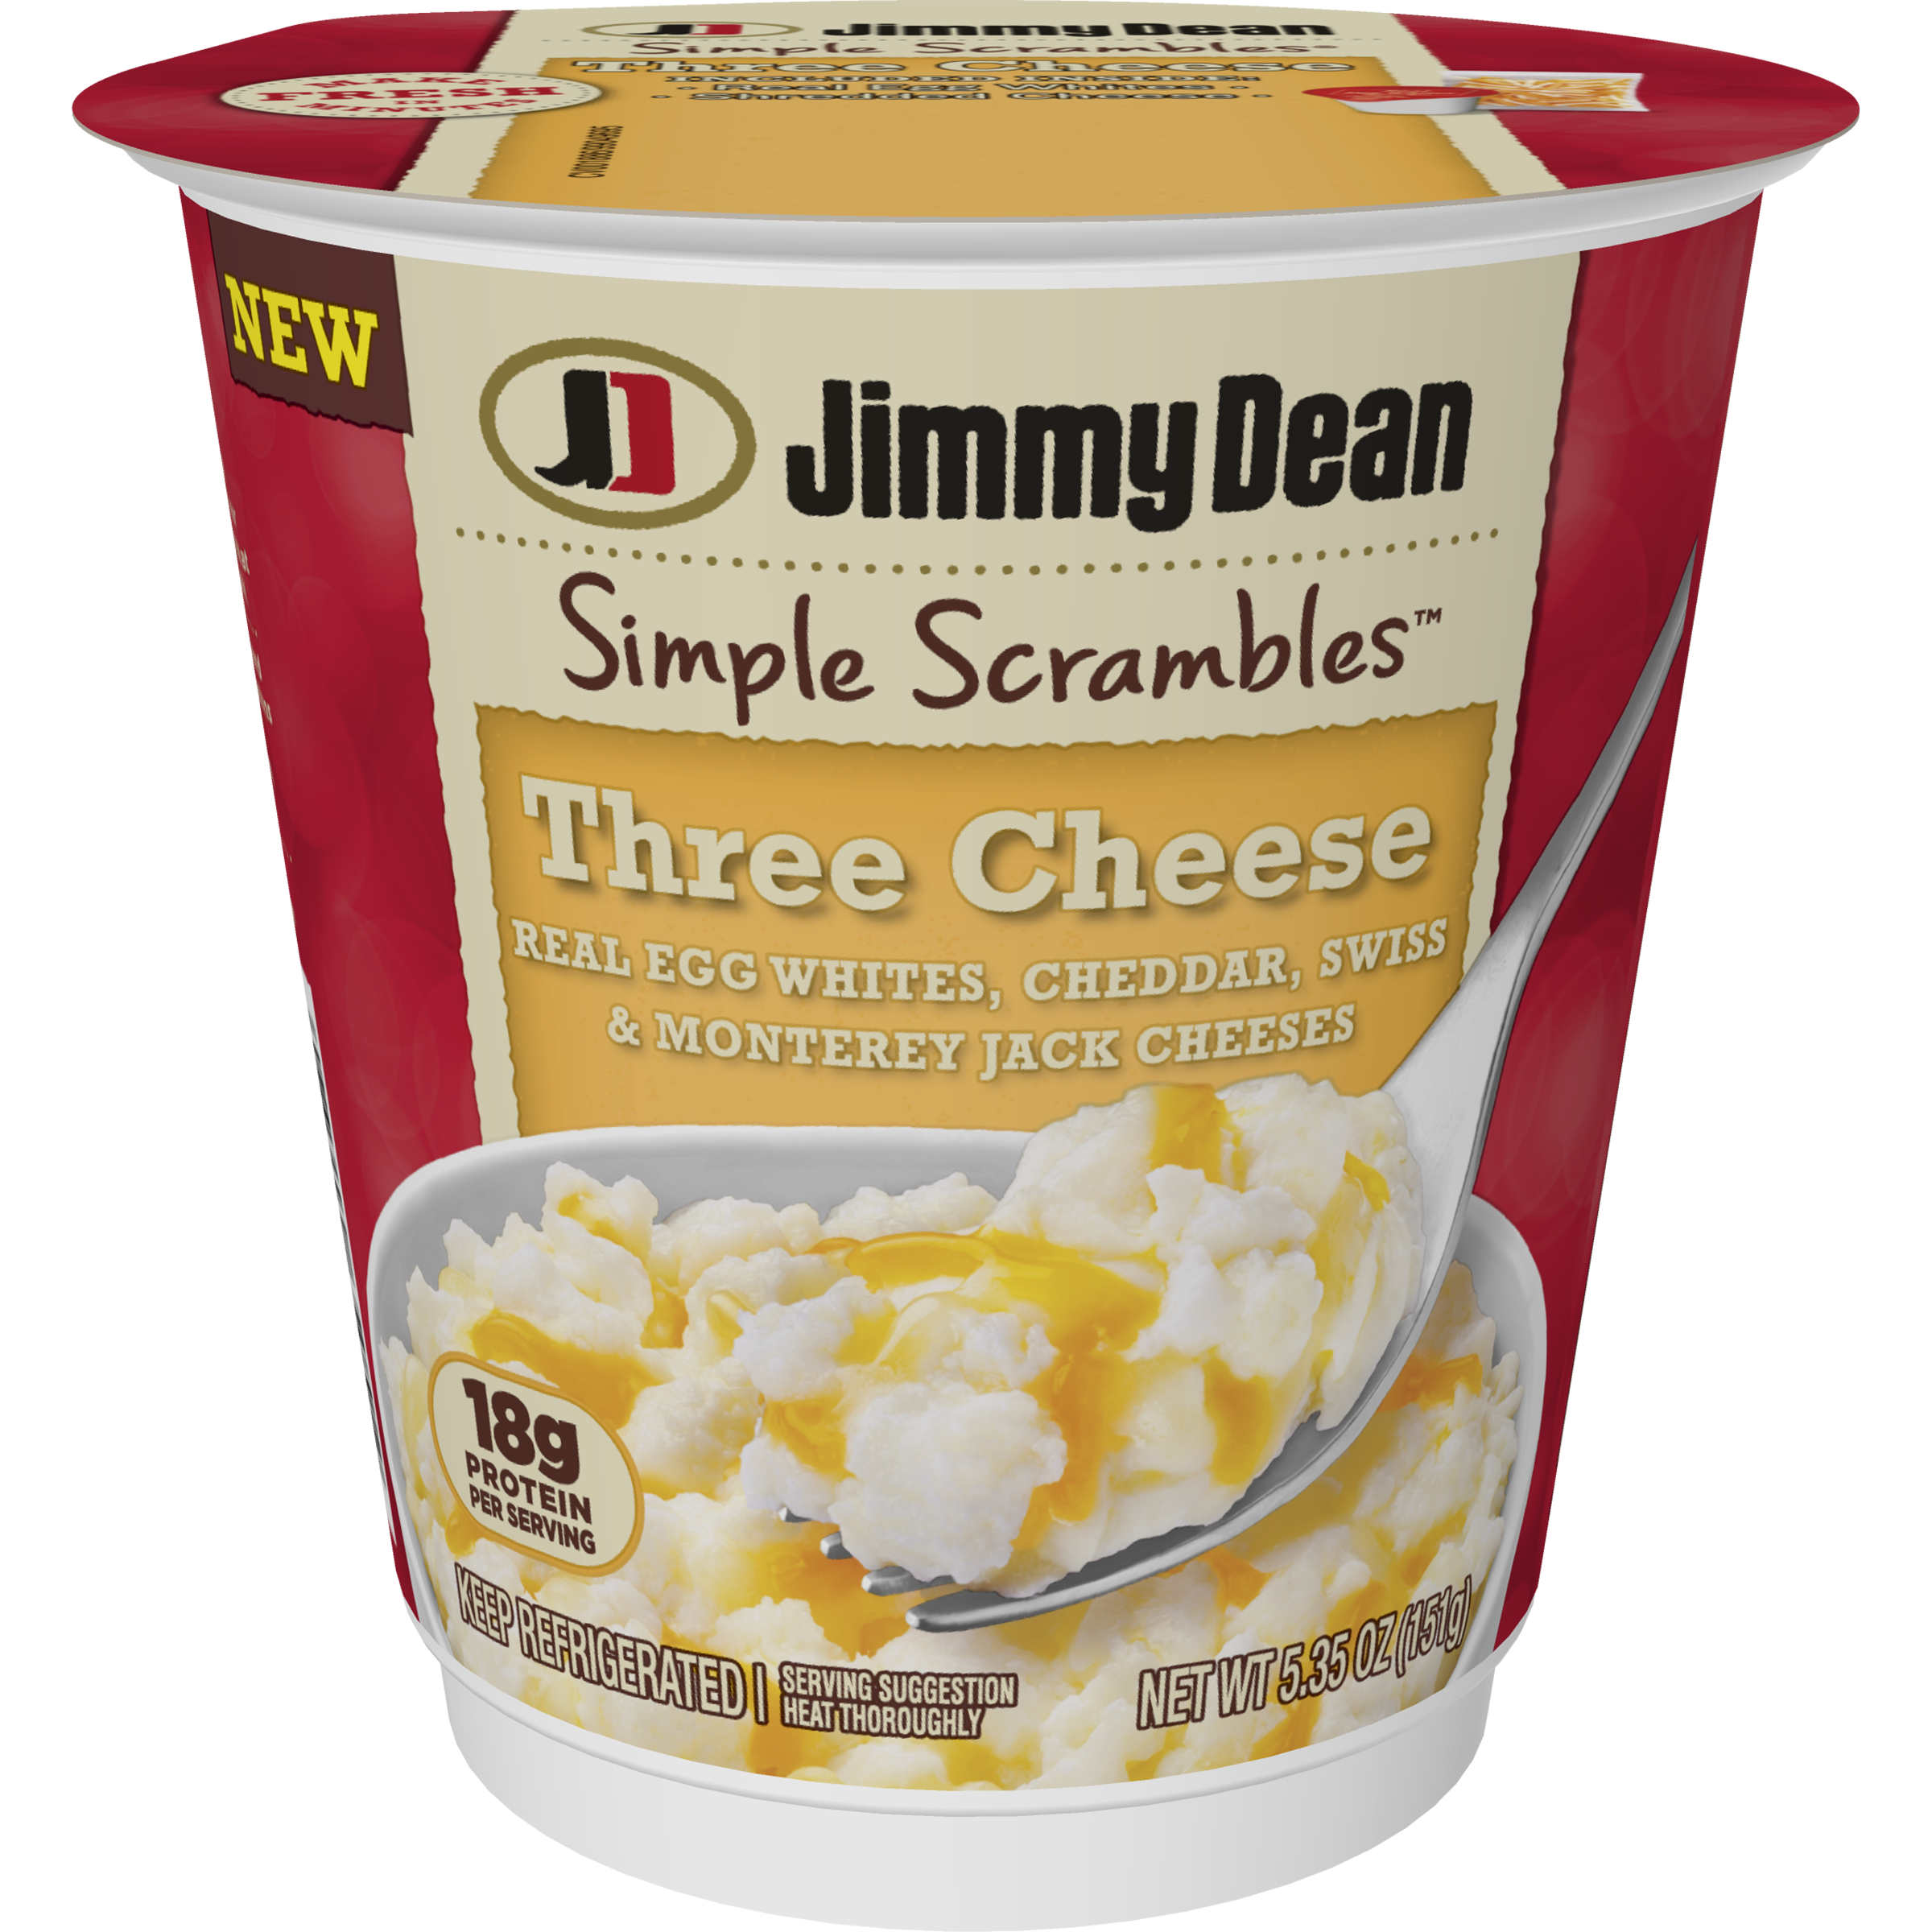 Jimmy Dean Simple Scrambles® Three Cheese Quick Breakfast Cup with Real Egg Whites, Cheddar, Swiss & Monterey Jack Cheeses 5.35 oz. - image 1 of 3